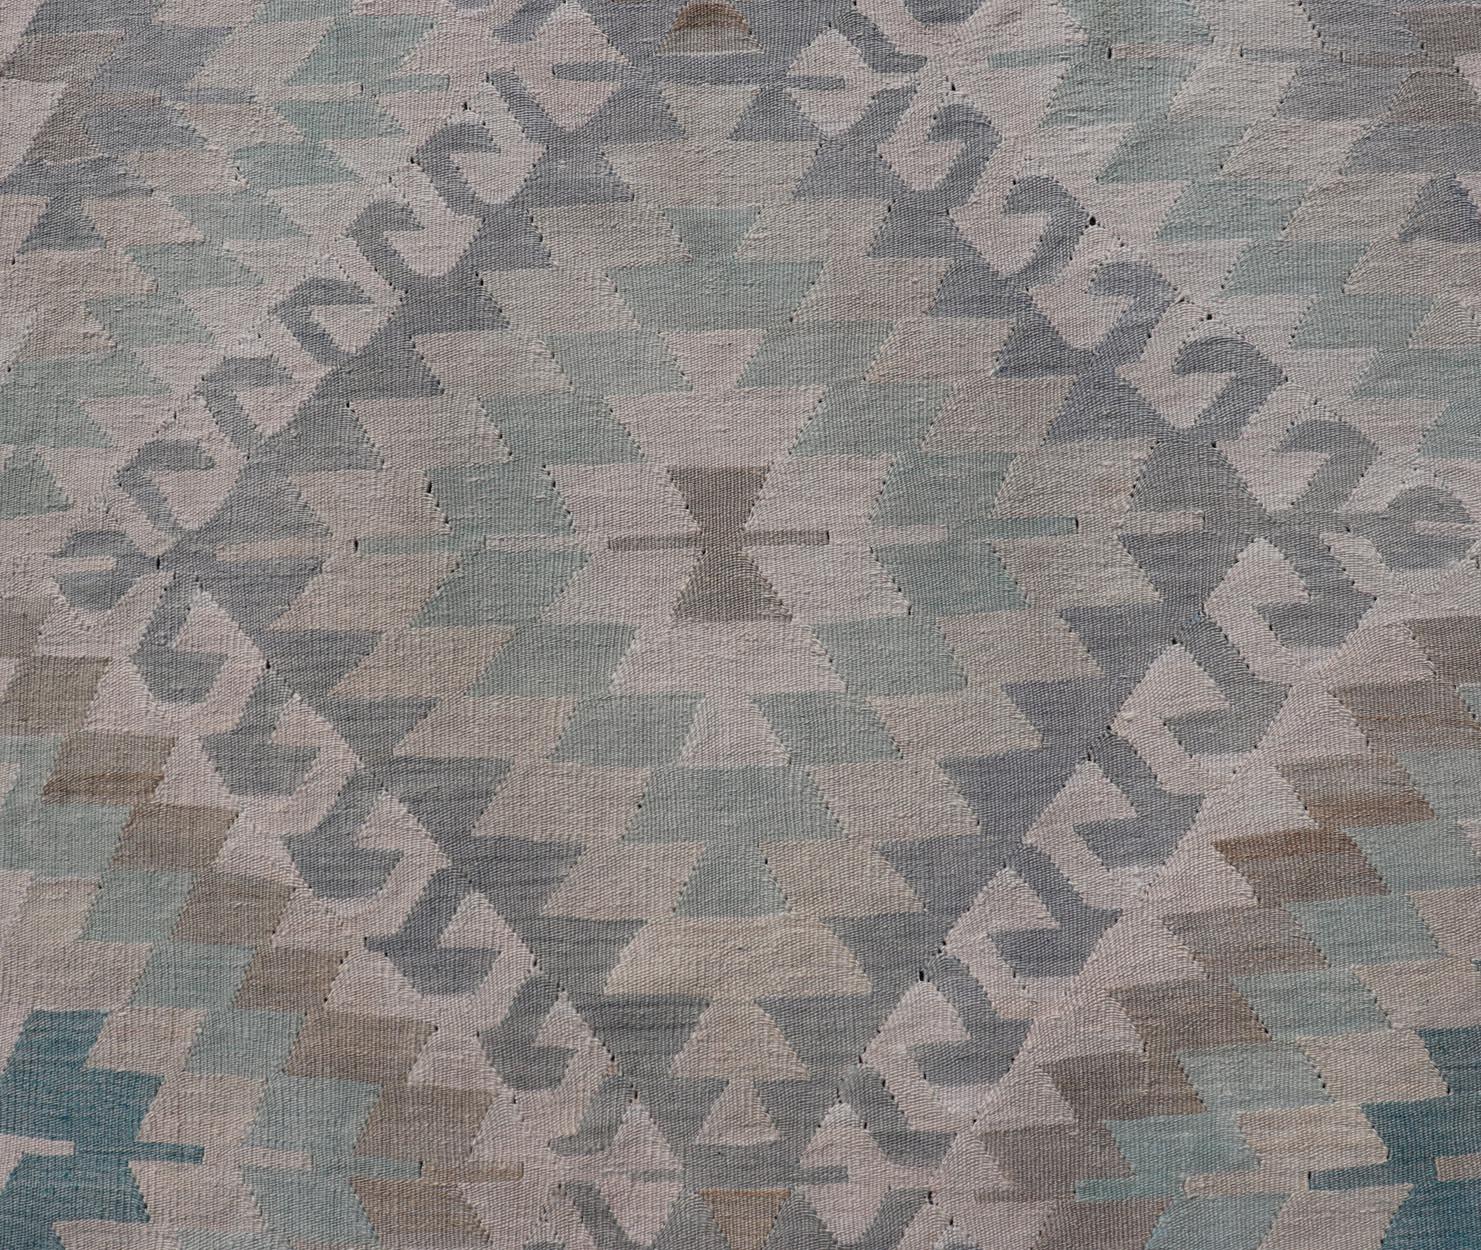 Geometric Design Vintage Turkish Tribal Flat-Weave Rug in Teal and Neutrals 2